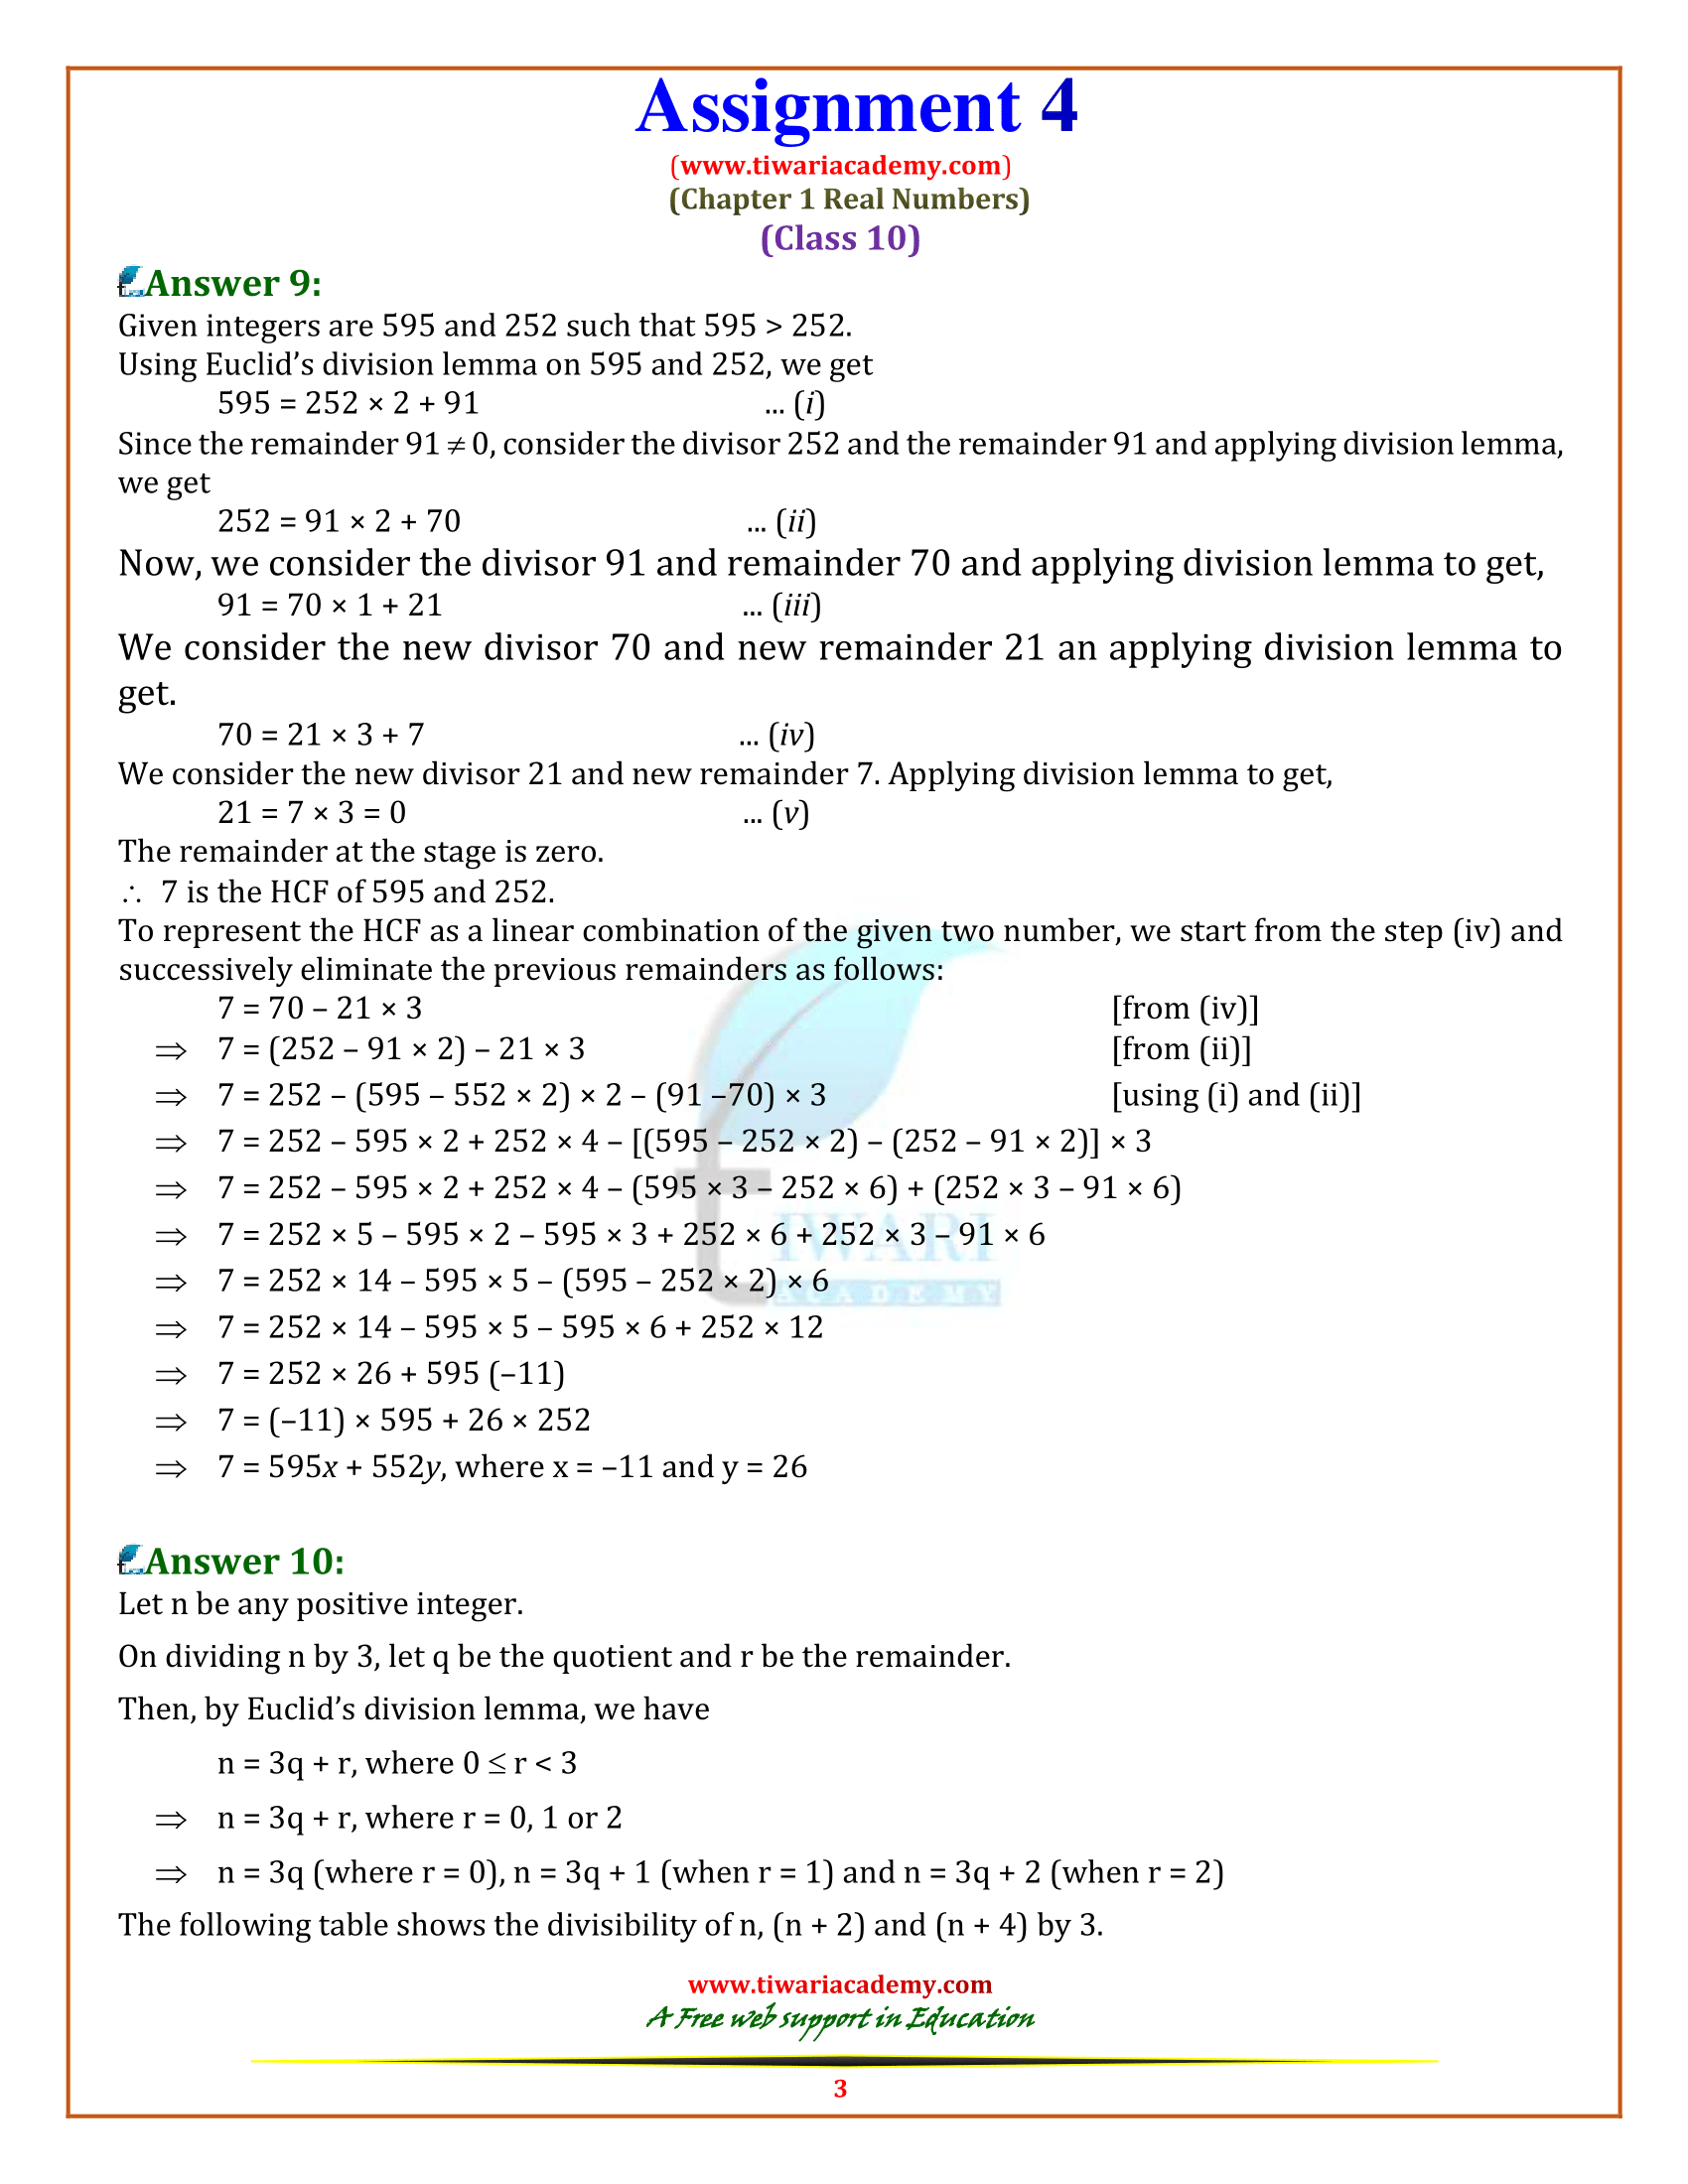 cbse 10th assignment